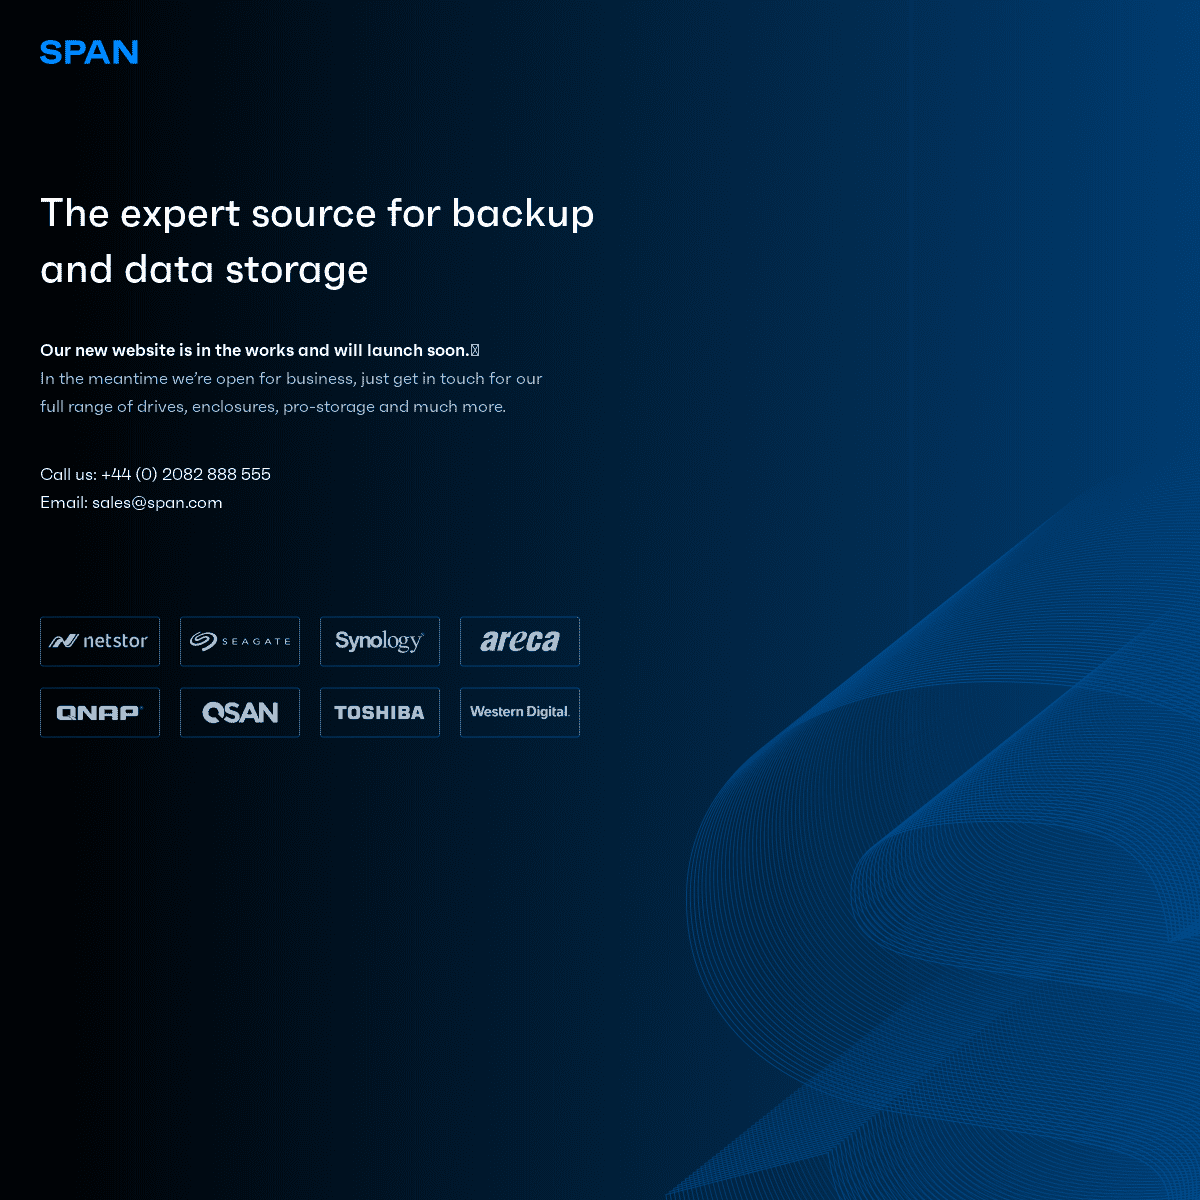 A complete backup of https://span.com